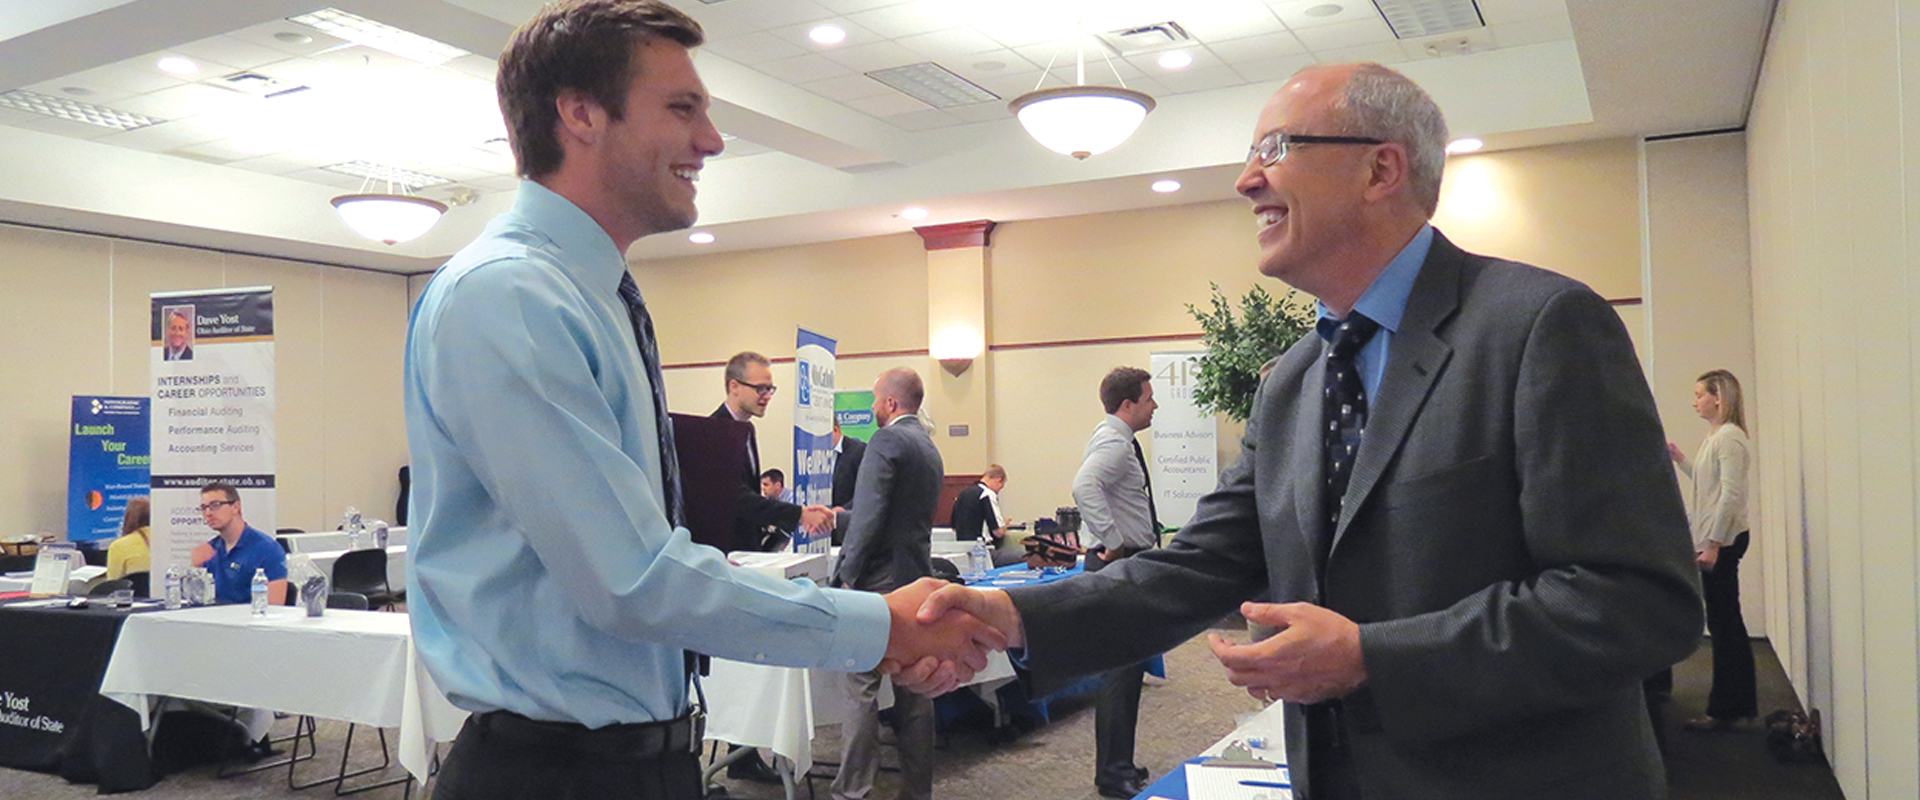 photo of student shaking hands with a company representative at a career fair